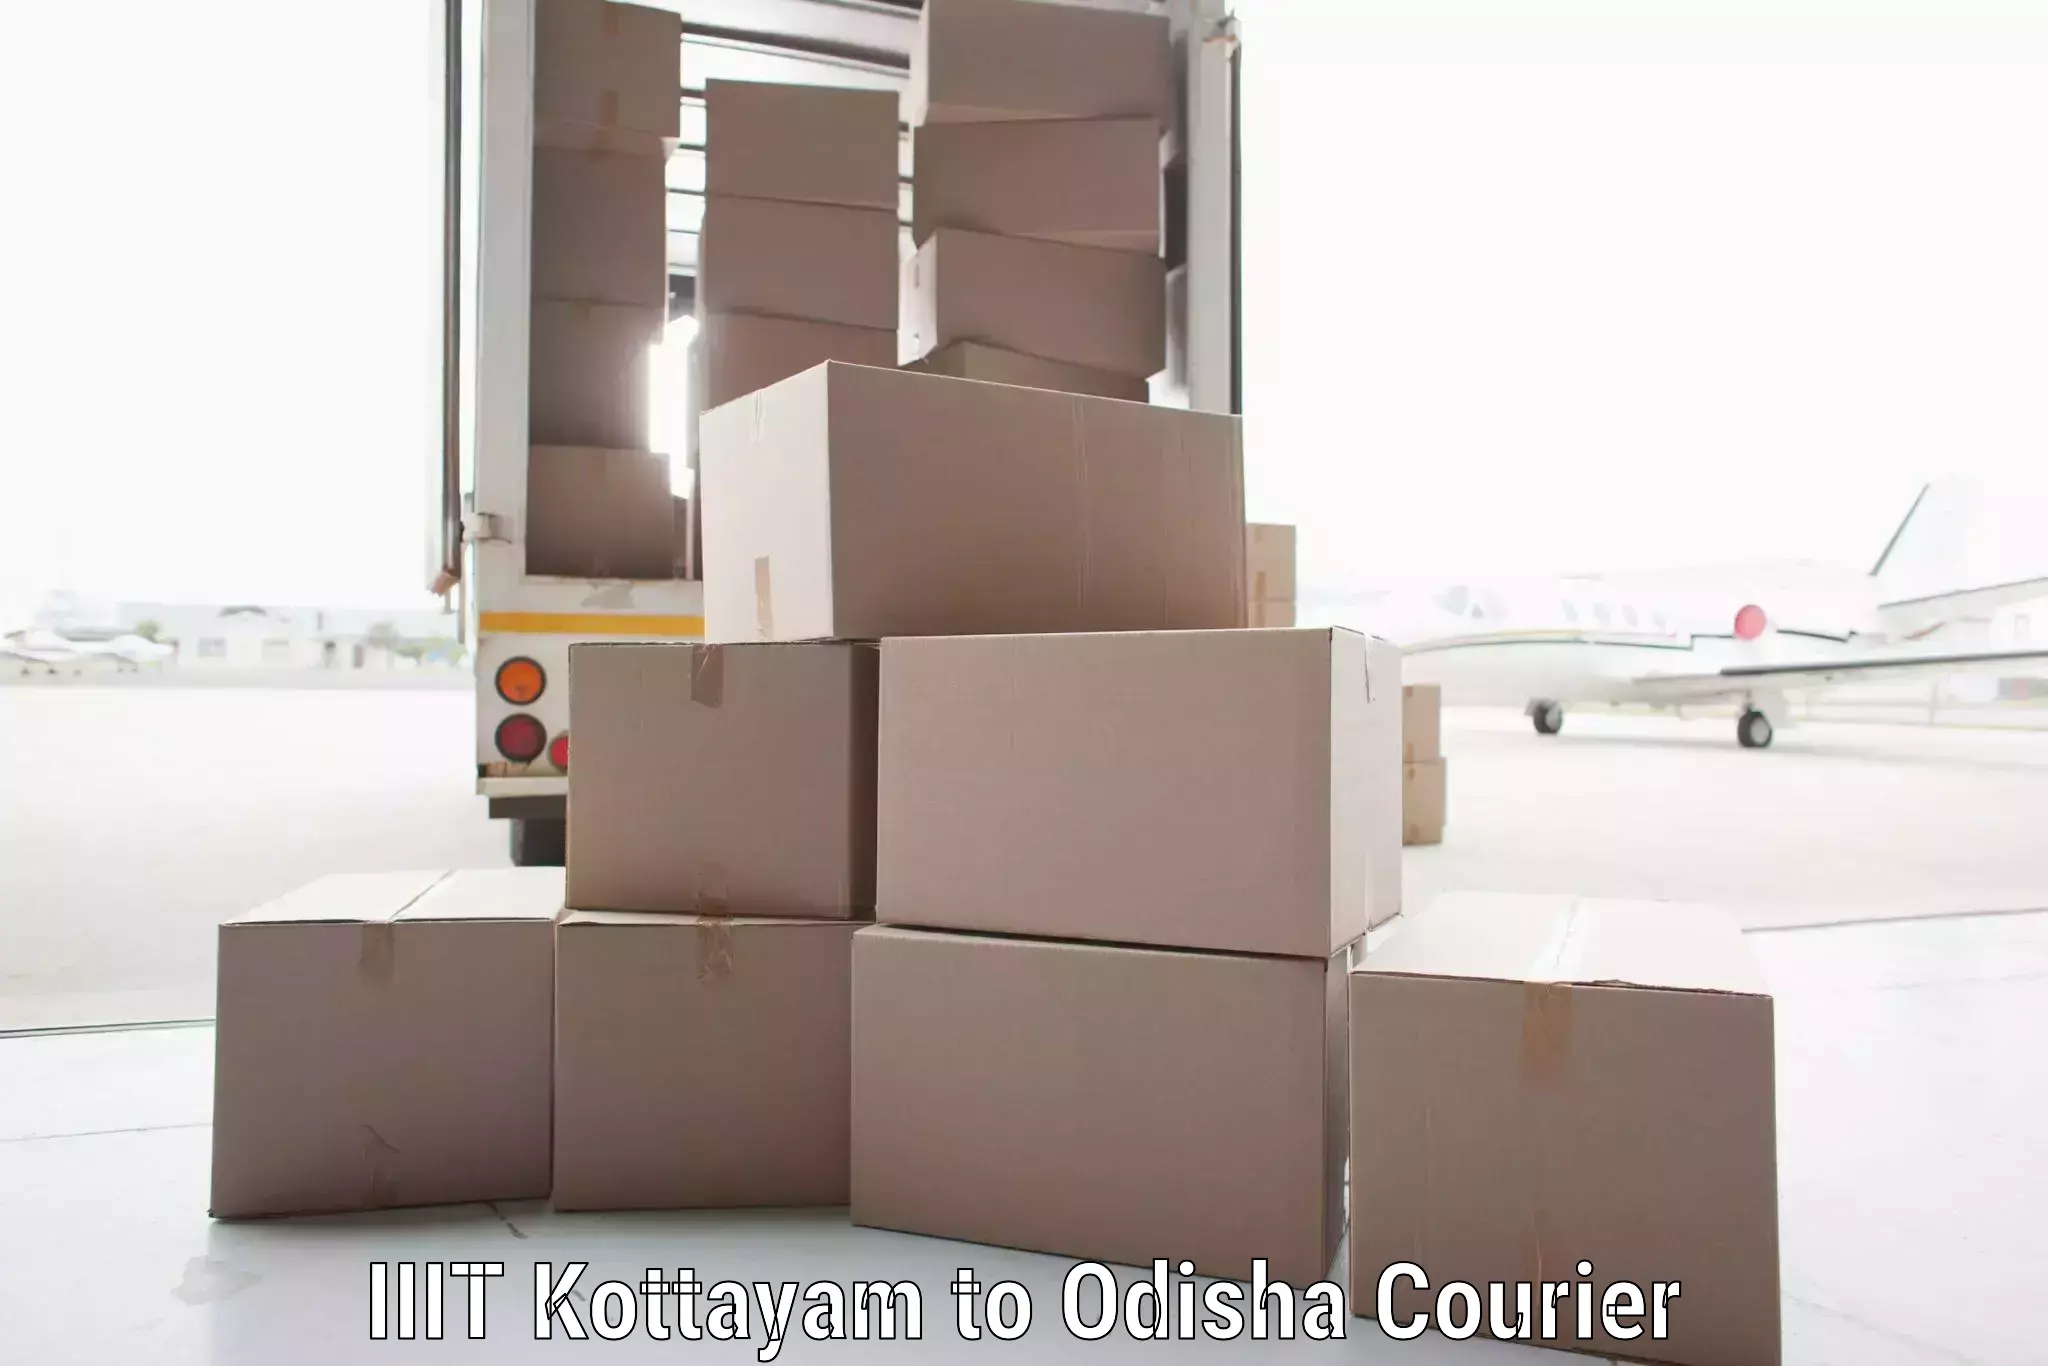 Easy access courier services in IIIT Kottayam to Sambalpur